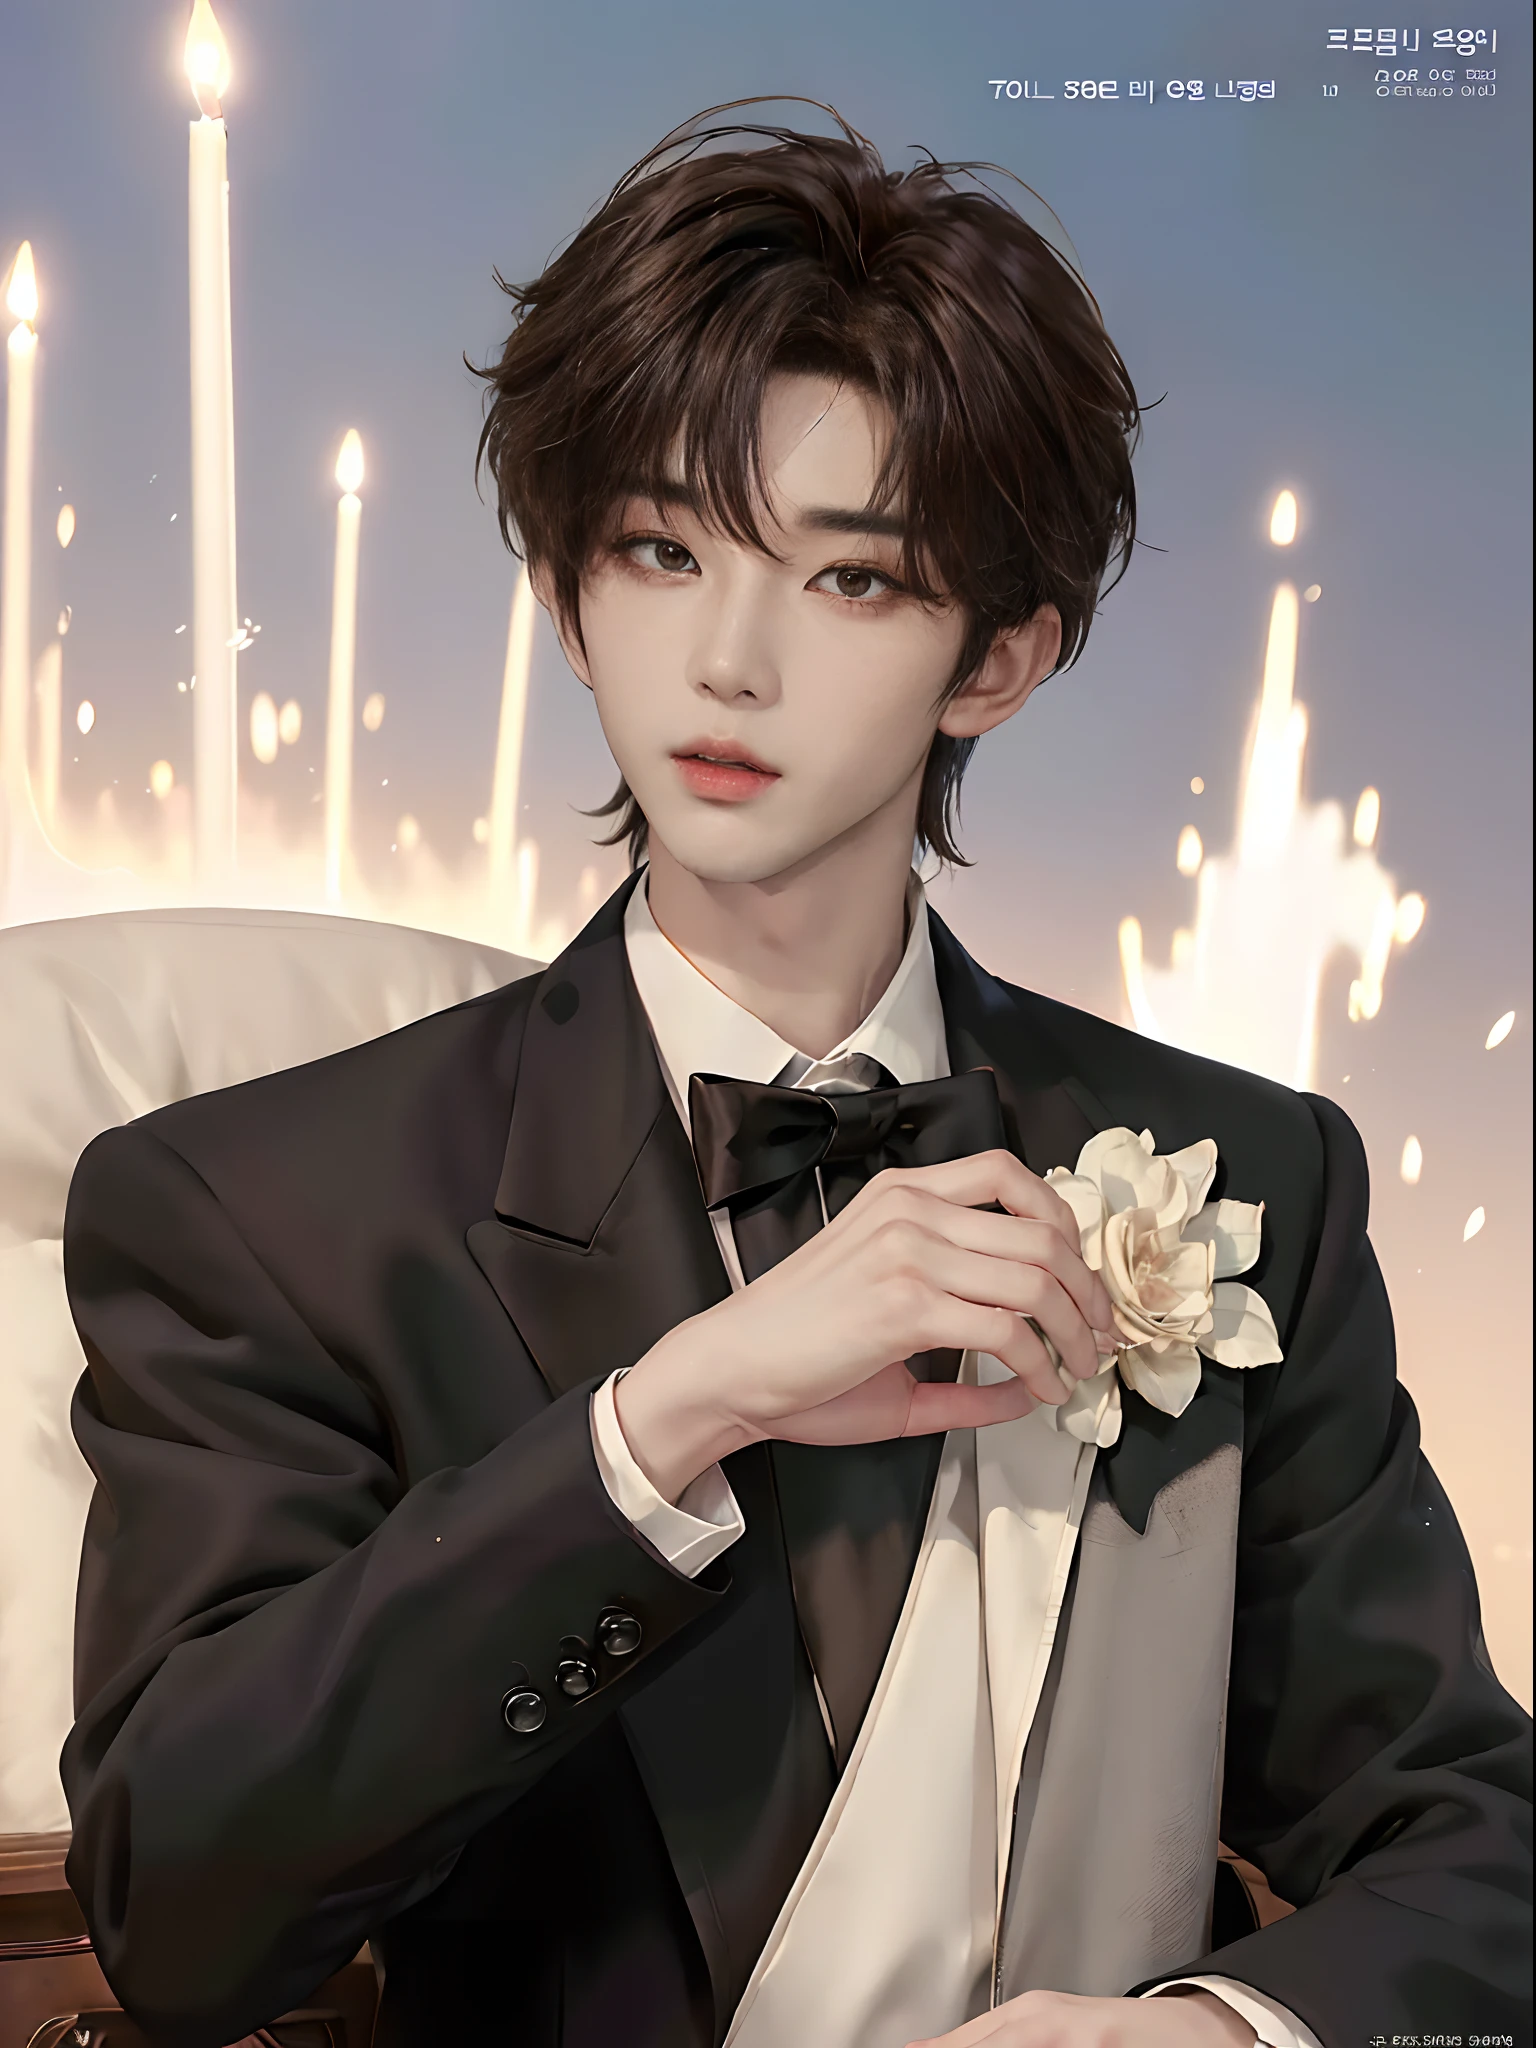 ((4K works))、​masterpiece、（top-quality)、((high-level image quality))、((One Manly Boy))、Slim body、((Man in black tuxedo))、(Detailed beautiful eyeodel Magazines))、deacon、Face similar to Chaewon in Ruseraphim、((short hair above the ears))、((Smaller face))、((Neutral face))、((Light brown eyes))、((Korean boy))、((18year old))、((Handsome man))、((A charming expression))、((Korean Makeup))、((elongated and sharp eyes))、((Focus zoom out))、((Model Magazine Cover))、((model poseodel photo))、((Butler Photos))、Professional Photoagazine covers))、((Shot alone))、((Upper body photography))